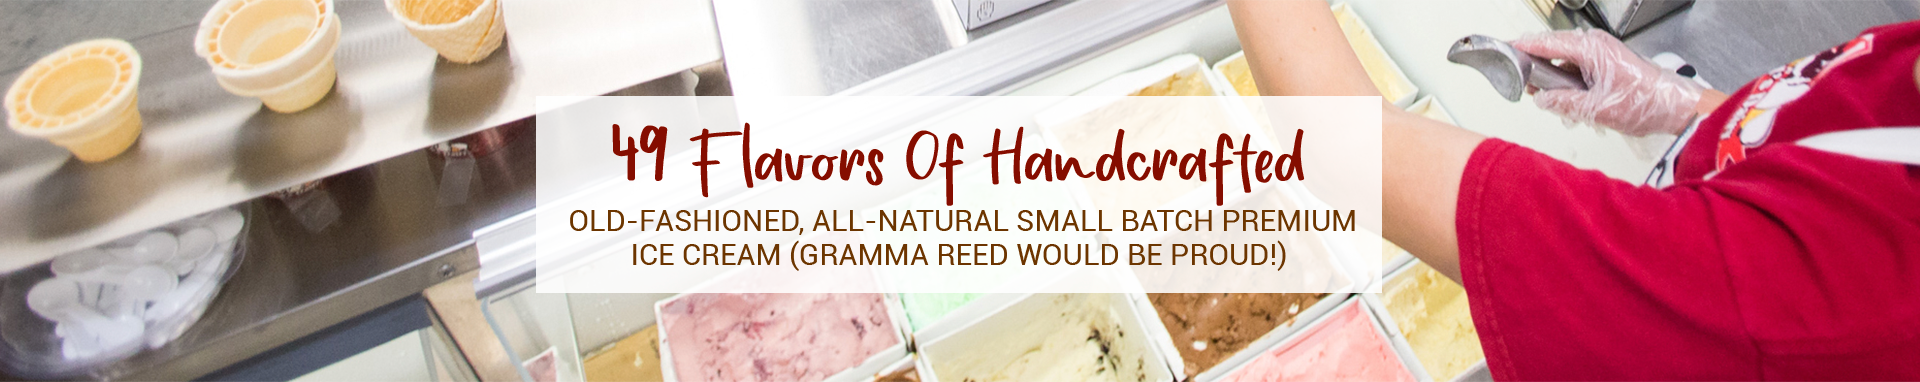 49 Flavors Of Handcrafted Ice Cream